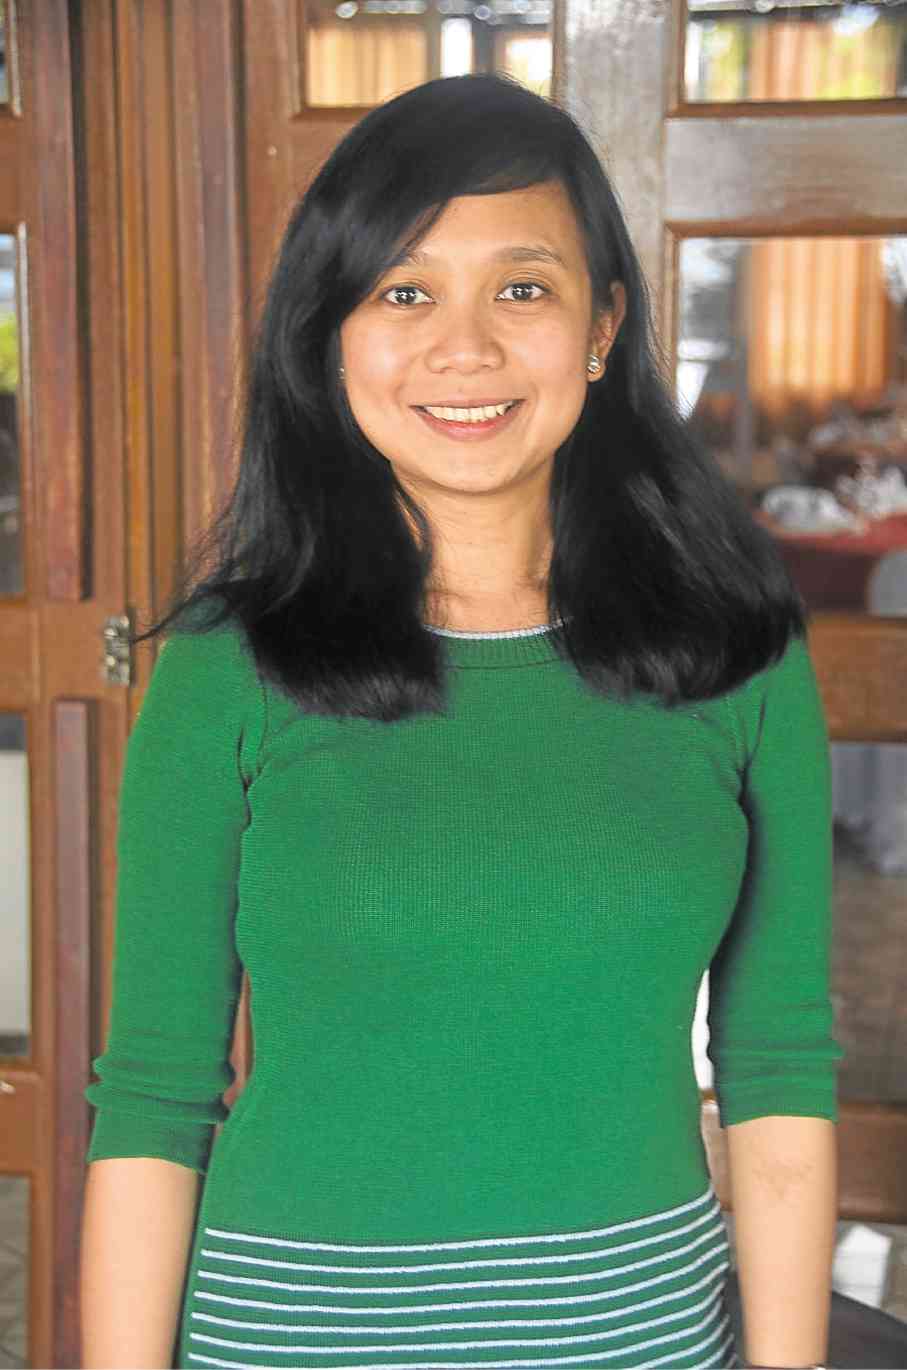 Filipina inspires after becoming Lead Operations Engineer at Europe Space Center